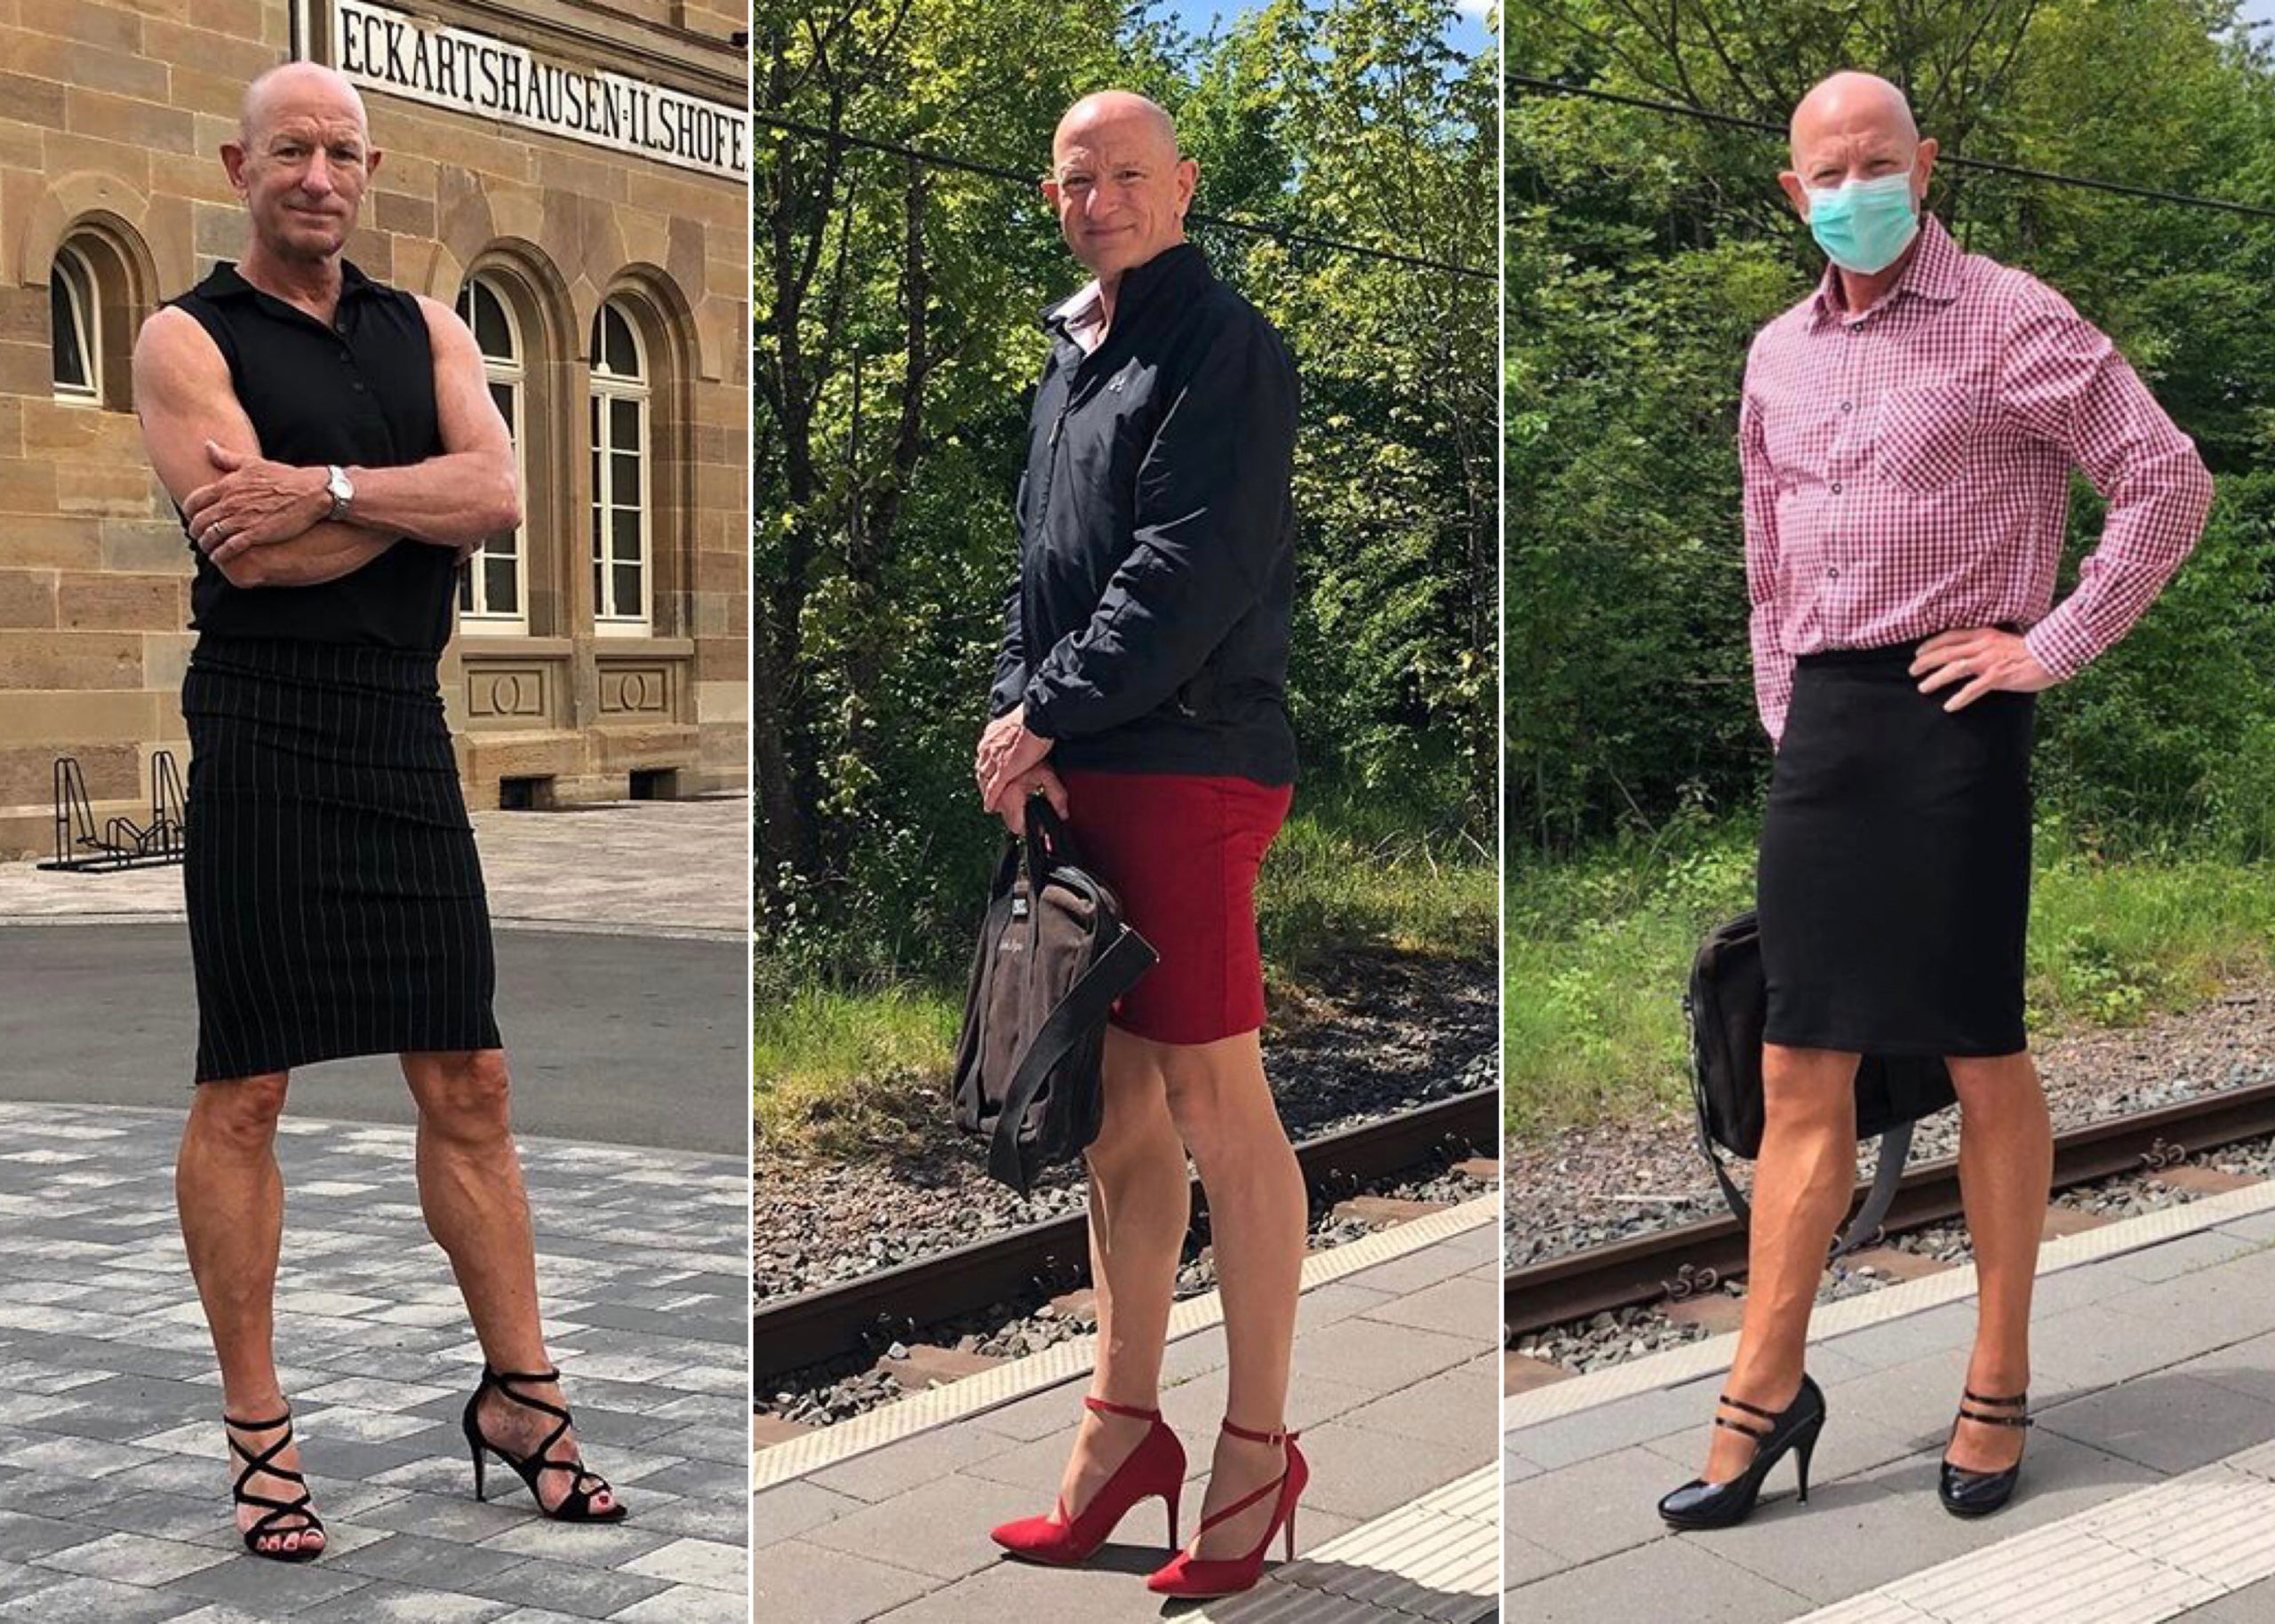 Straight, Married Dad Proudly Wears Skirts, High Heels To Prove Clothes, Shoes Have No Gender